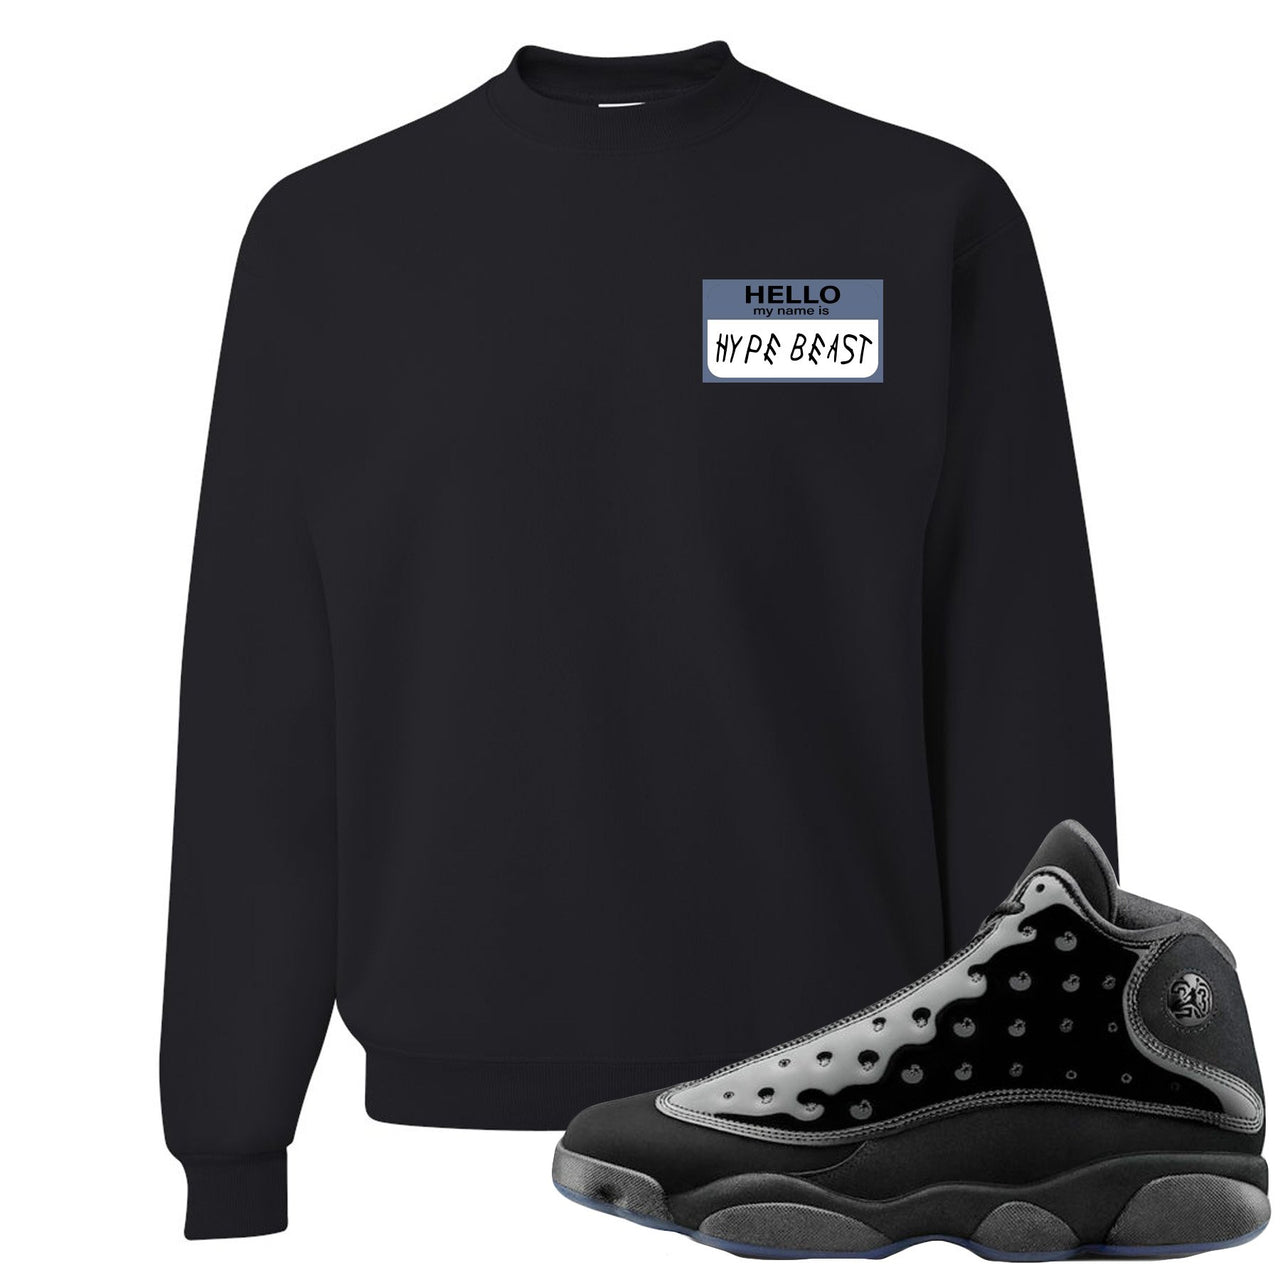 Cap and Gown 13s Crewneck Sweatshirt | Hello My Name is Hype Beast Woe Style, Black